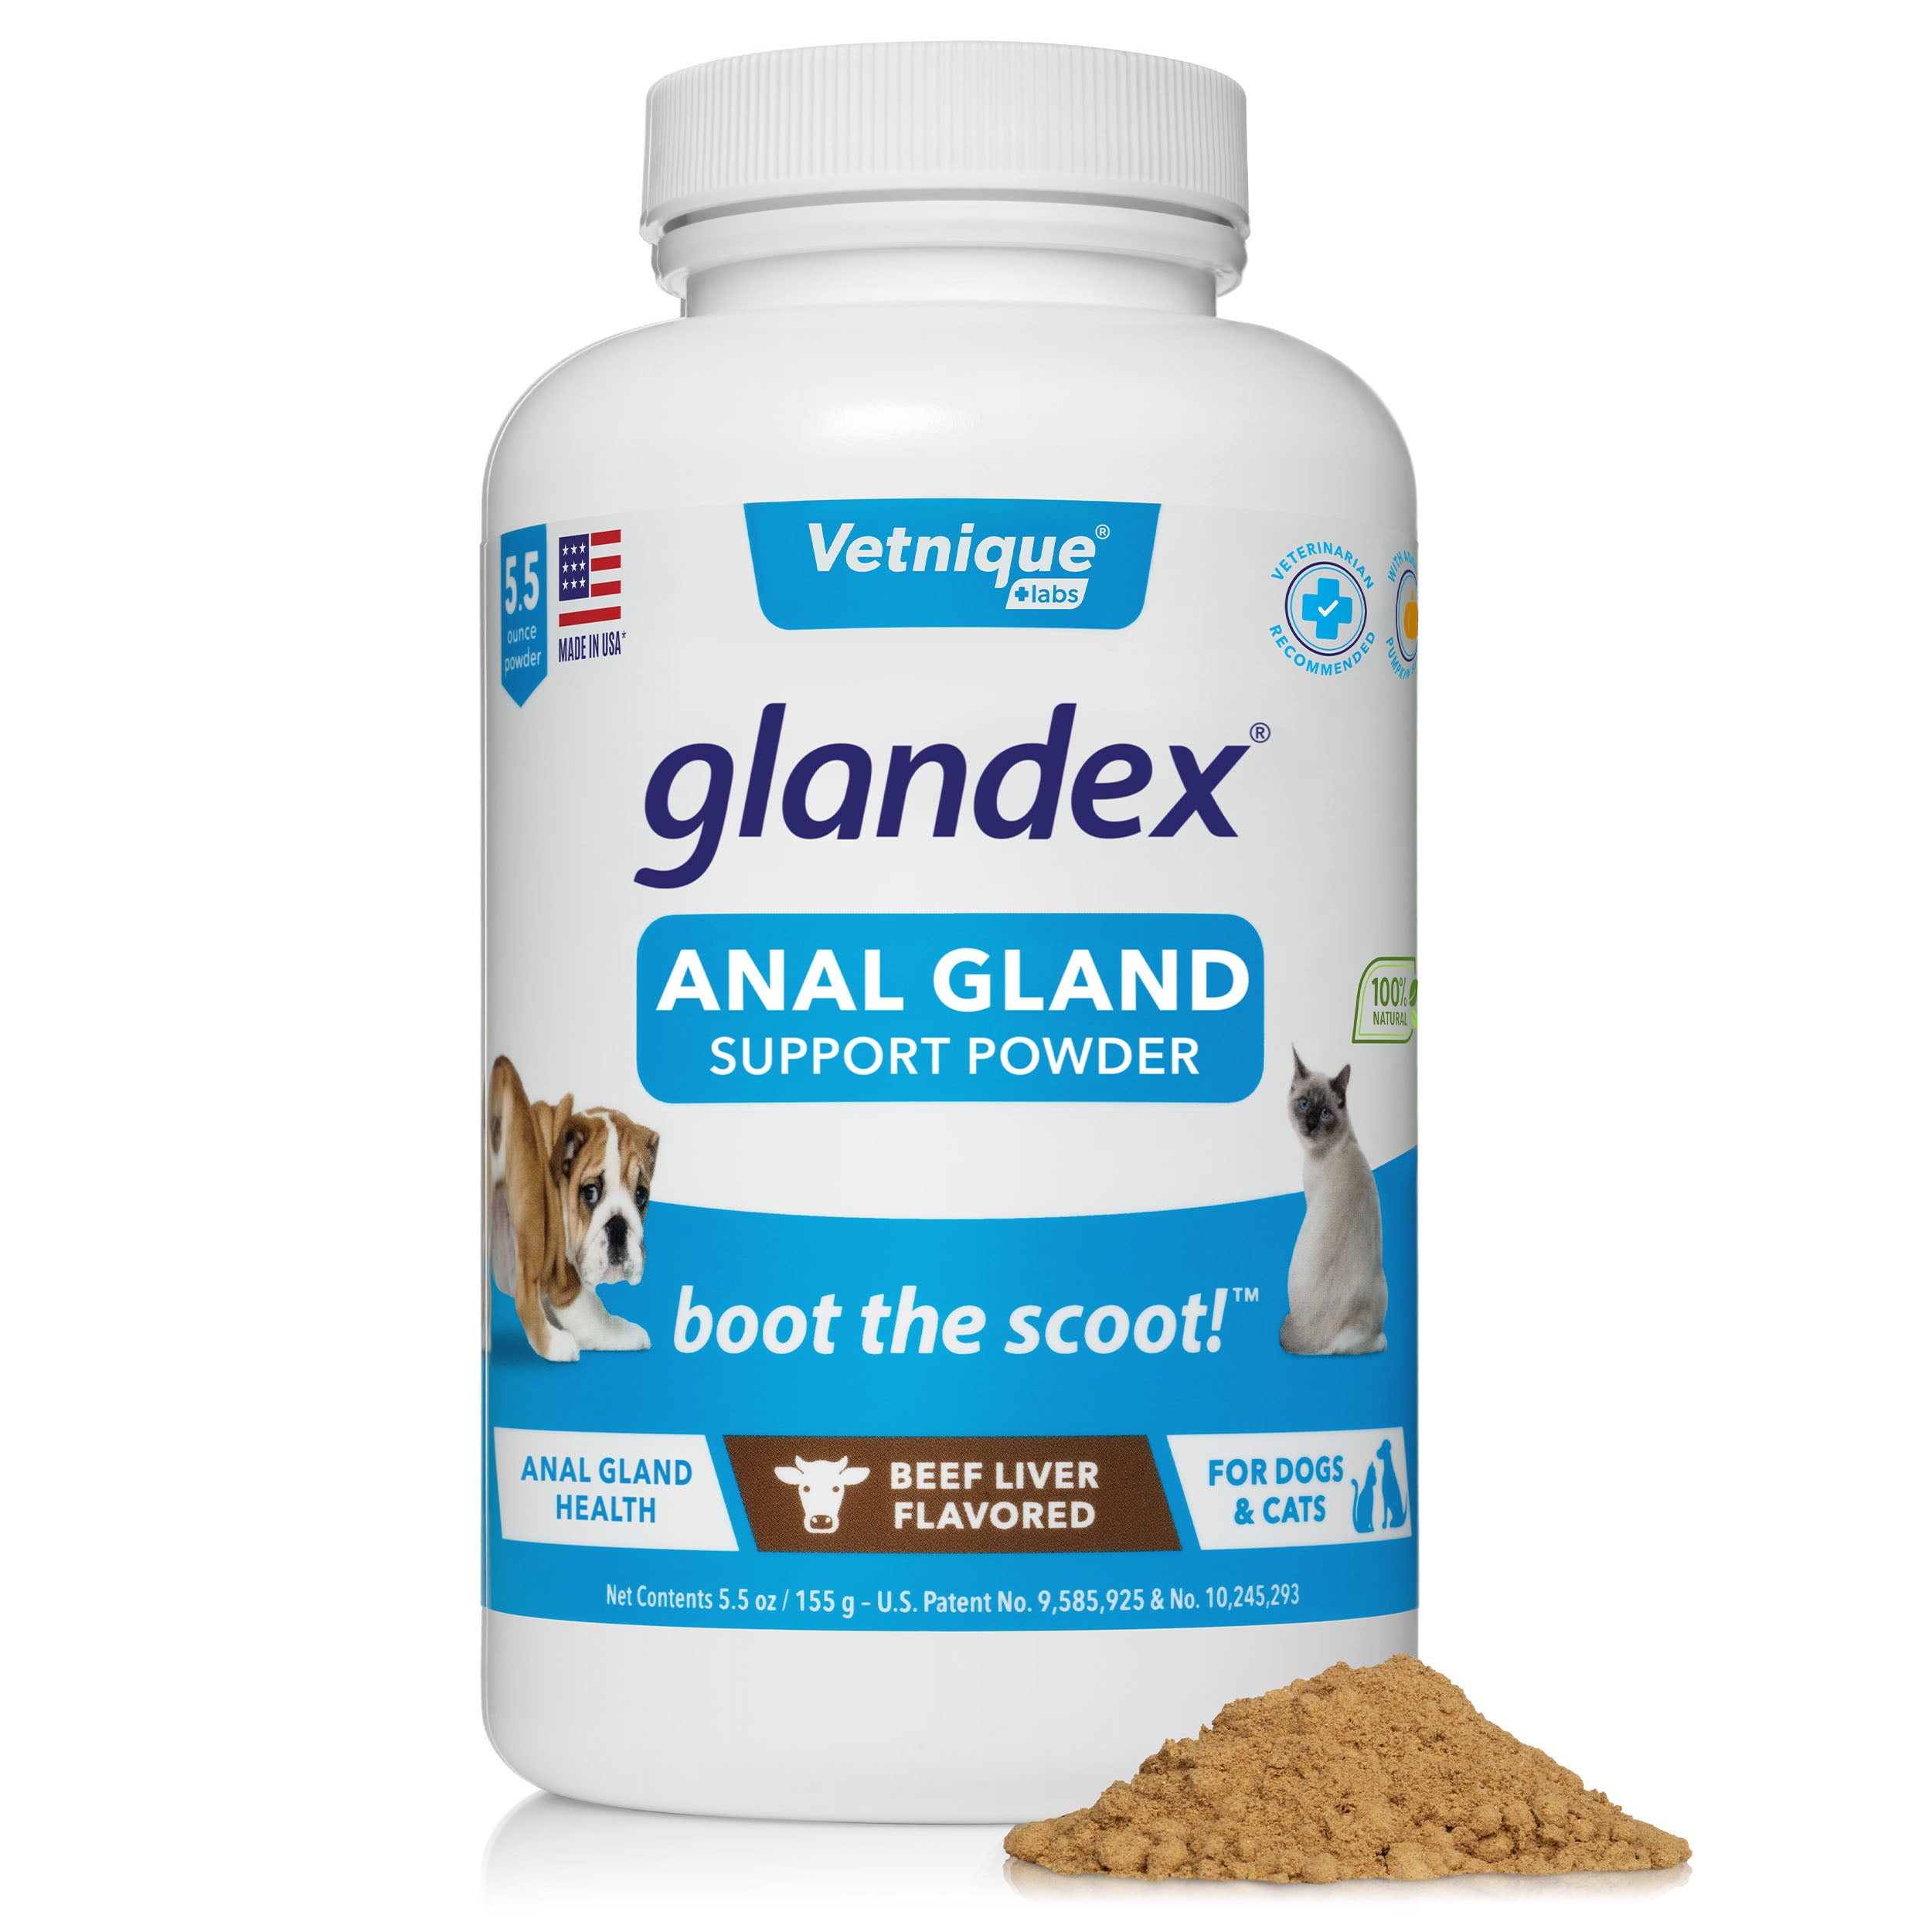 Glandex® Anal Gland Supplement for Dogs & Cats with Pumpkin - 2.5 oz P